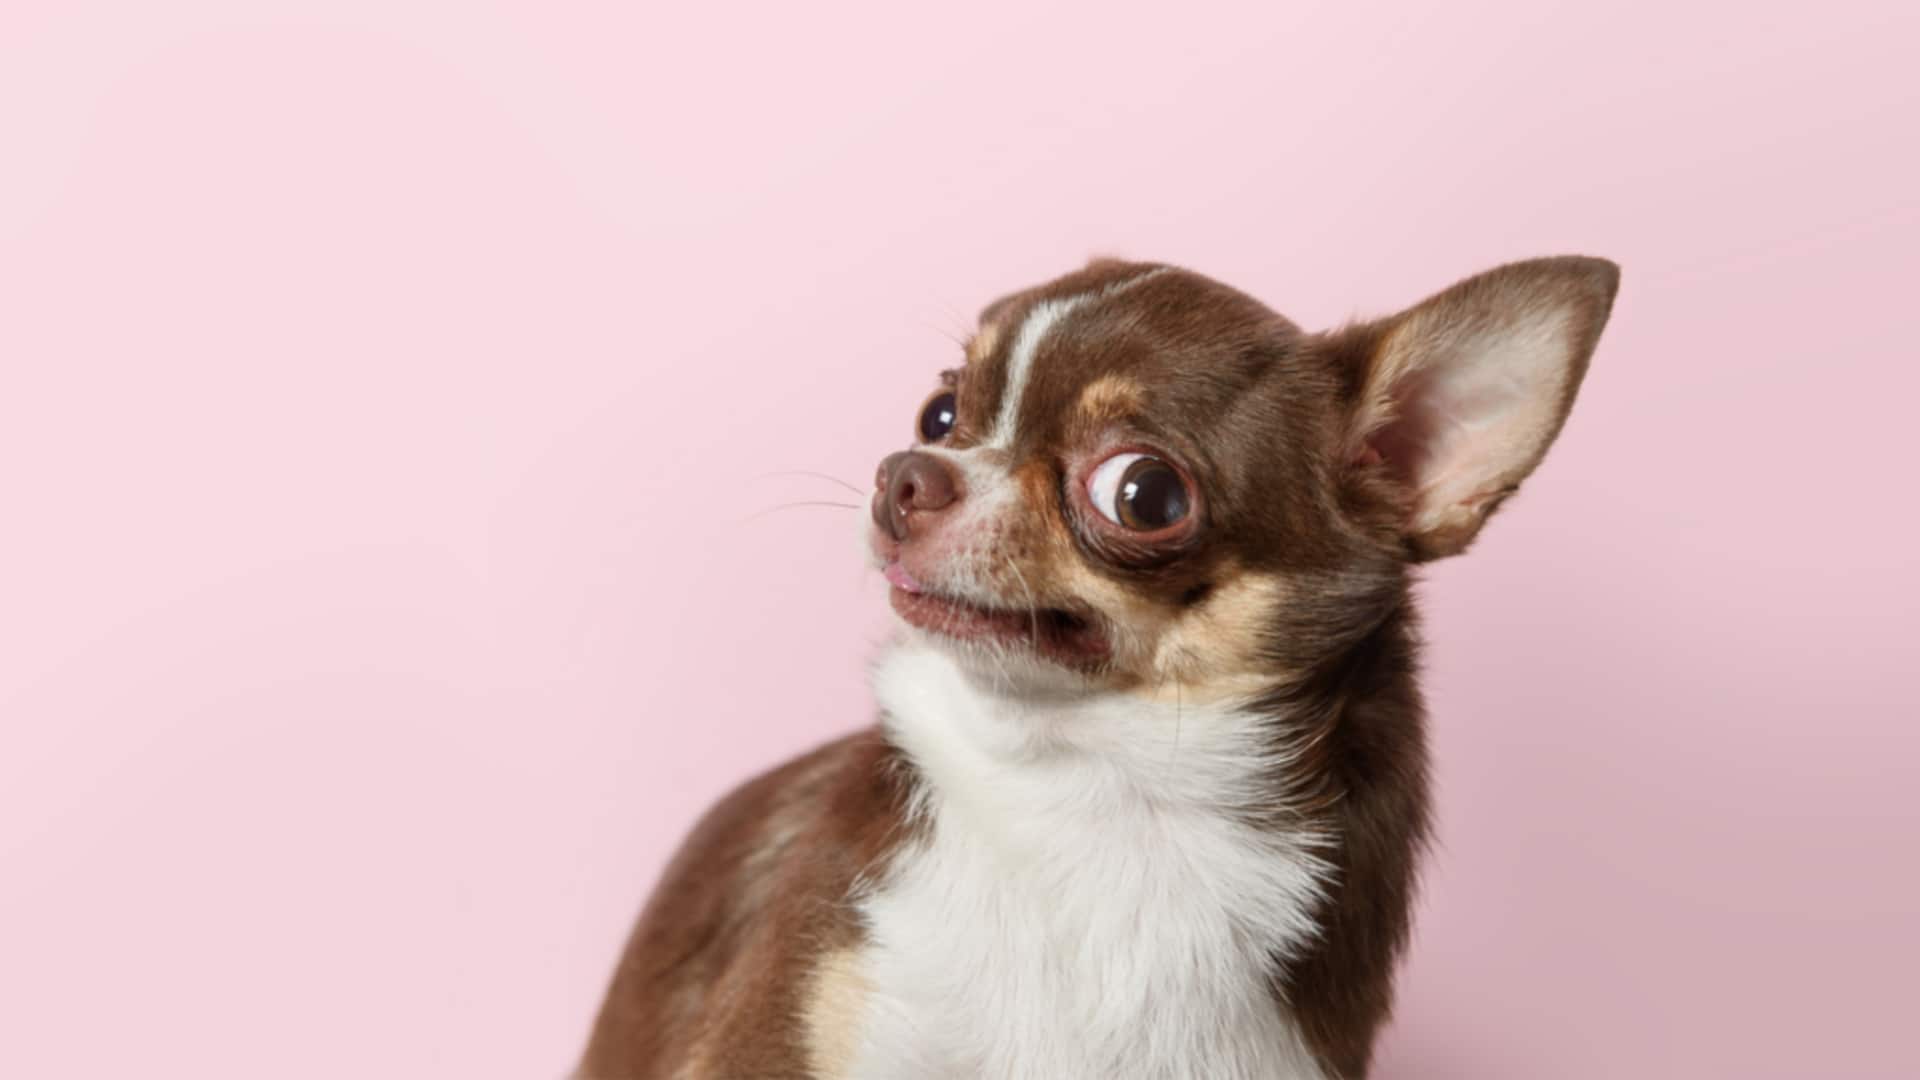 Chihuahua dental care essentials: Take note of these tips